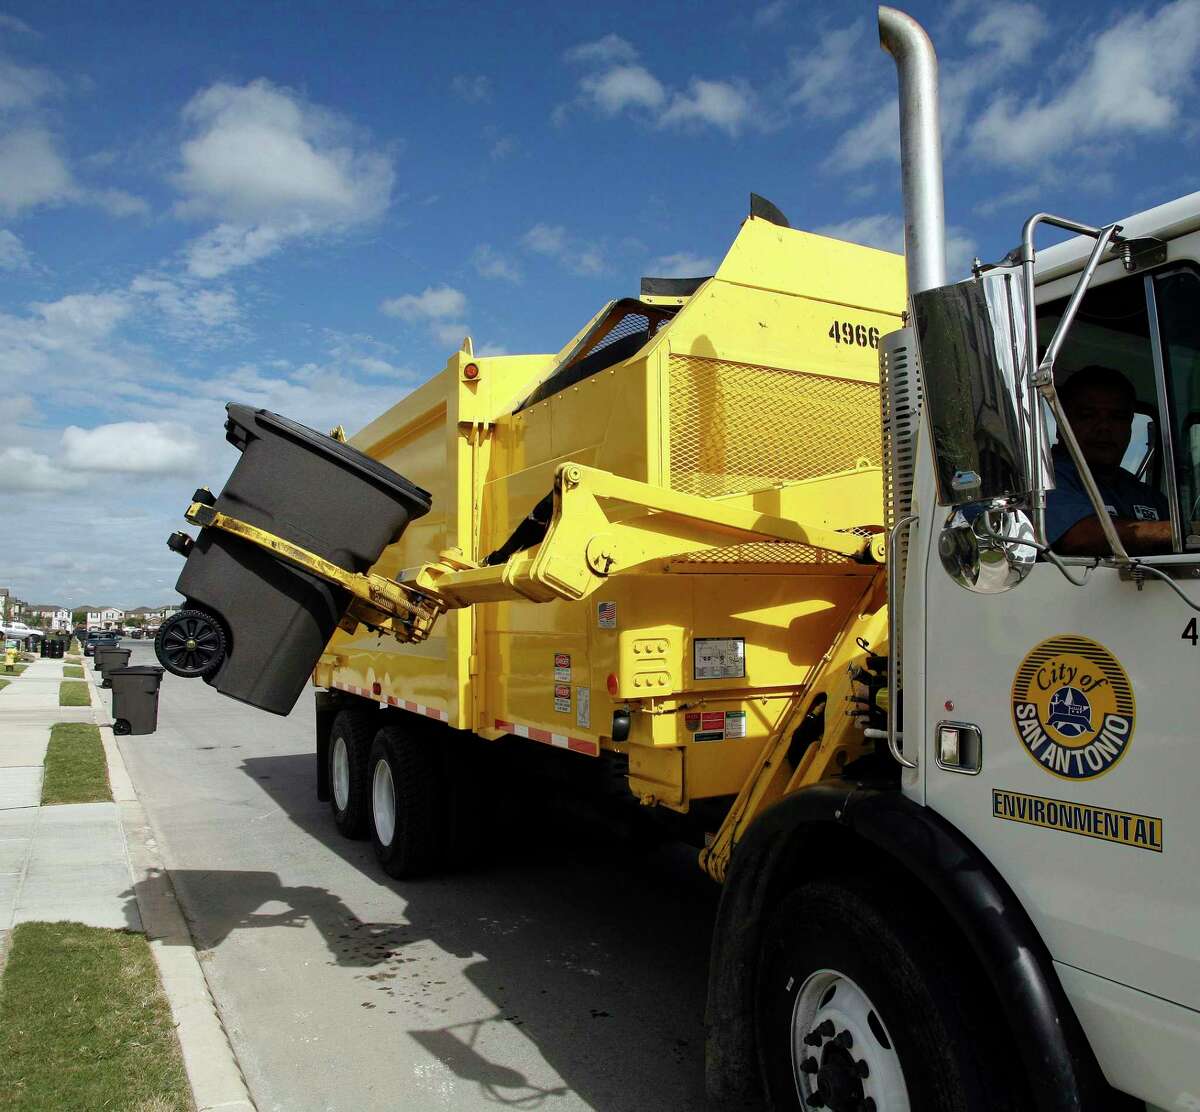 About 37 percent of San Antonio’s 311 calls are directed at the city’s Solid Waste Management Department.